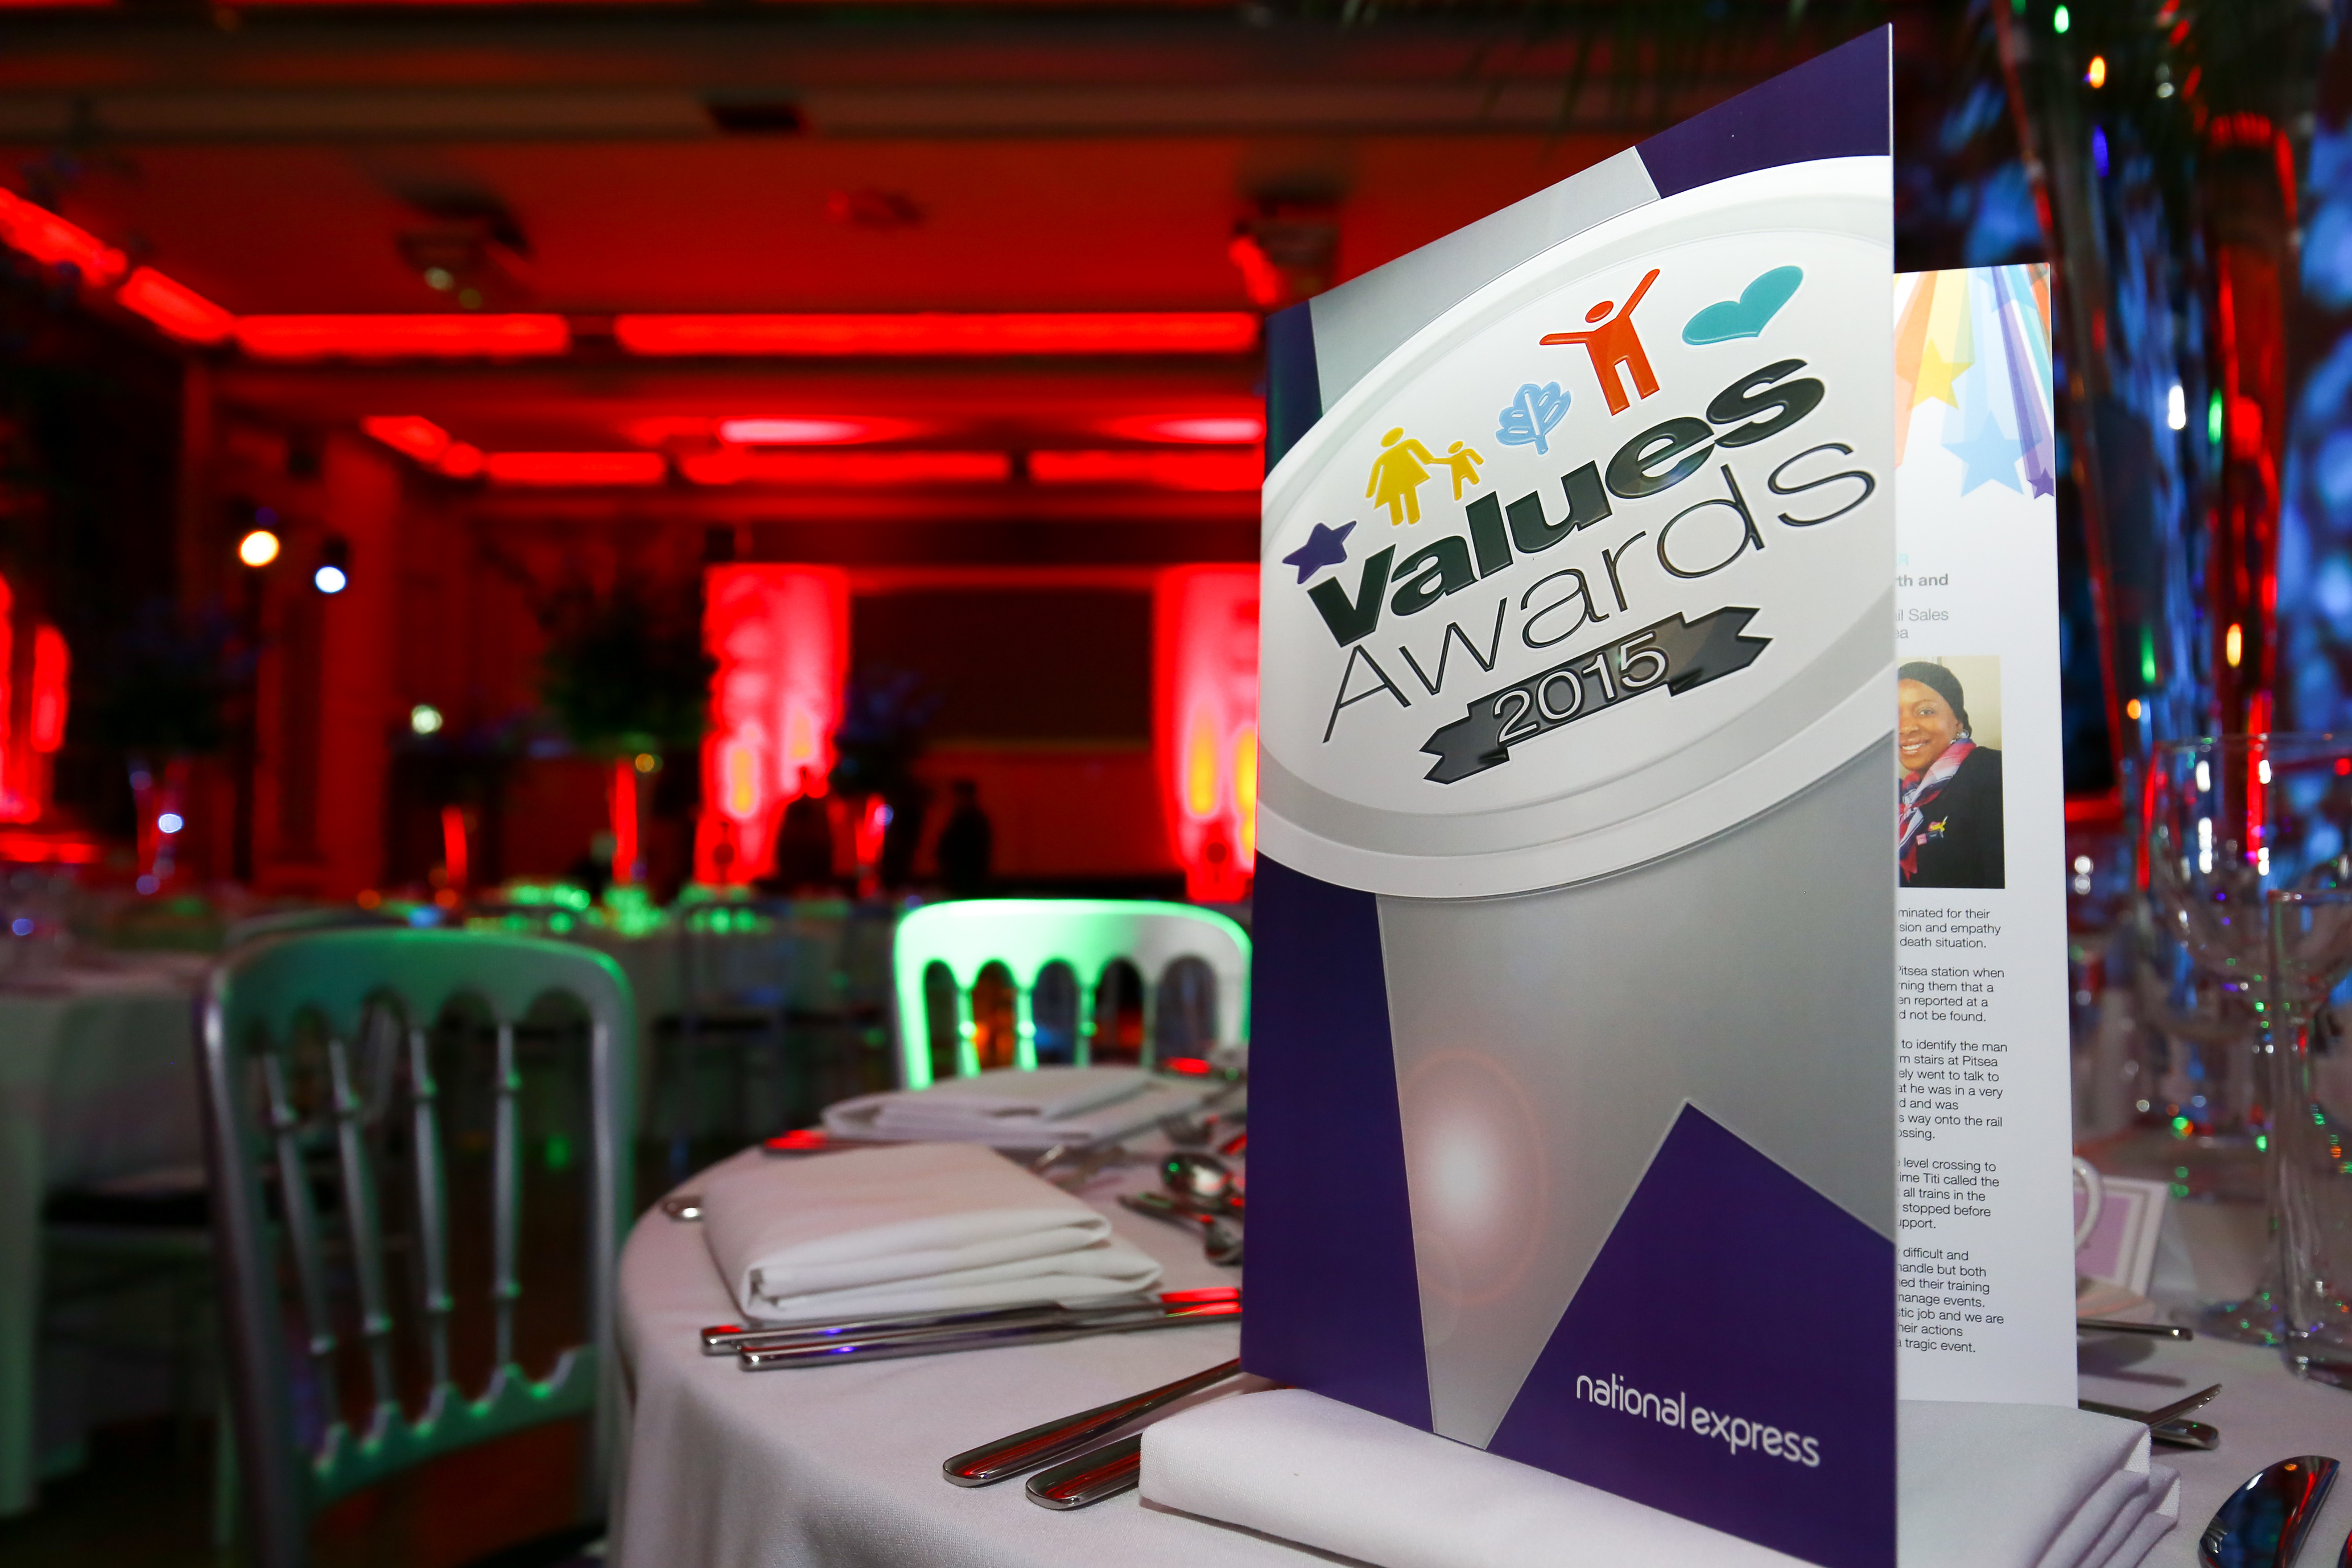 National Express Value Awards 2015. Picture by Shaun Fellows / Shine Pix